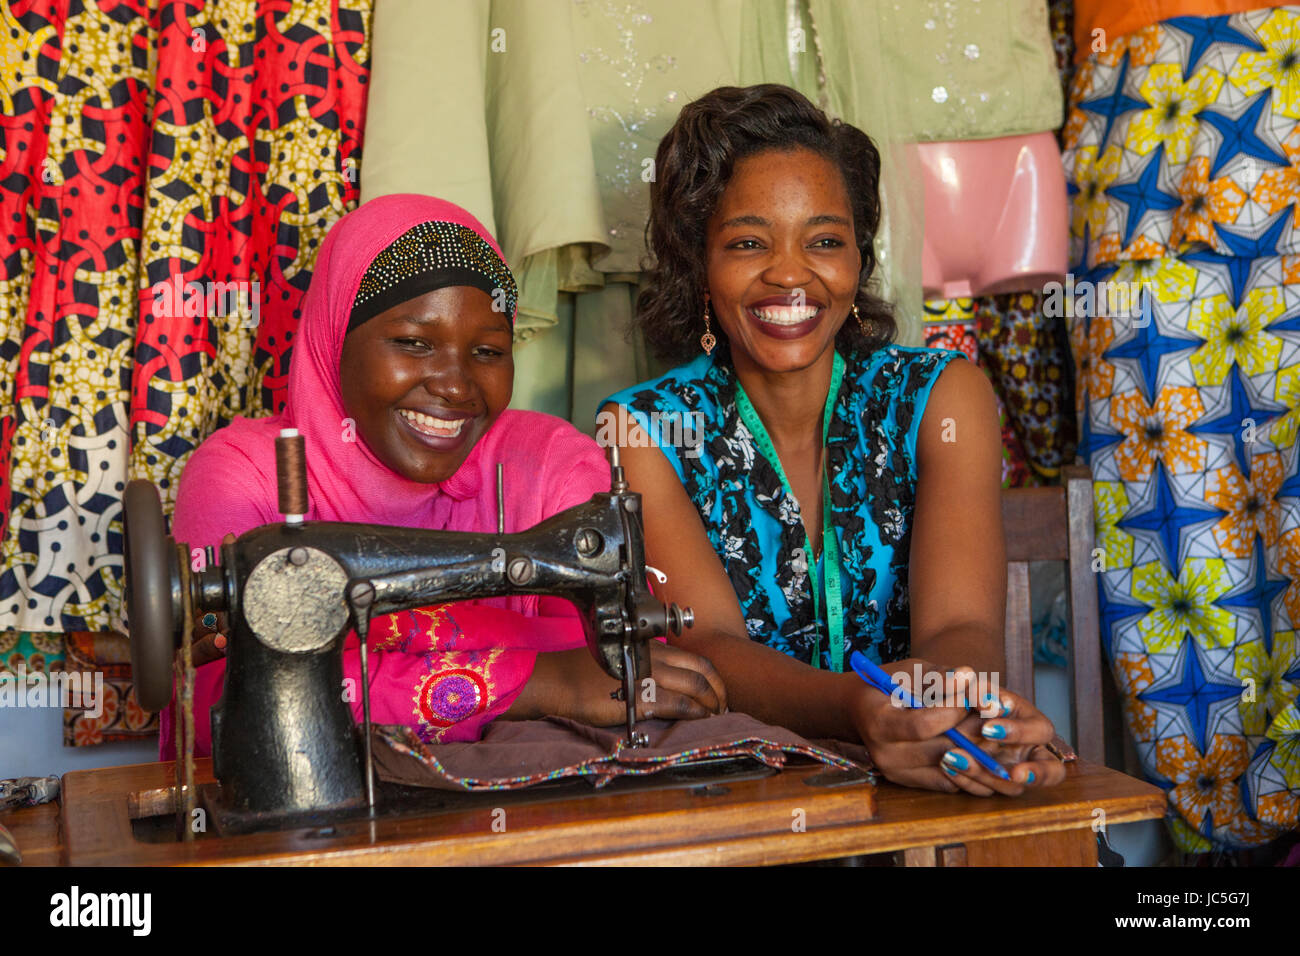 A small business female tailor with a student, Tanzania, Africa. Stock Photo